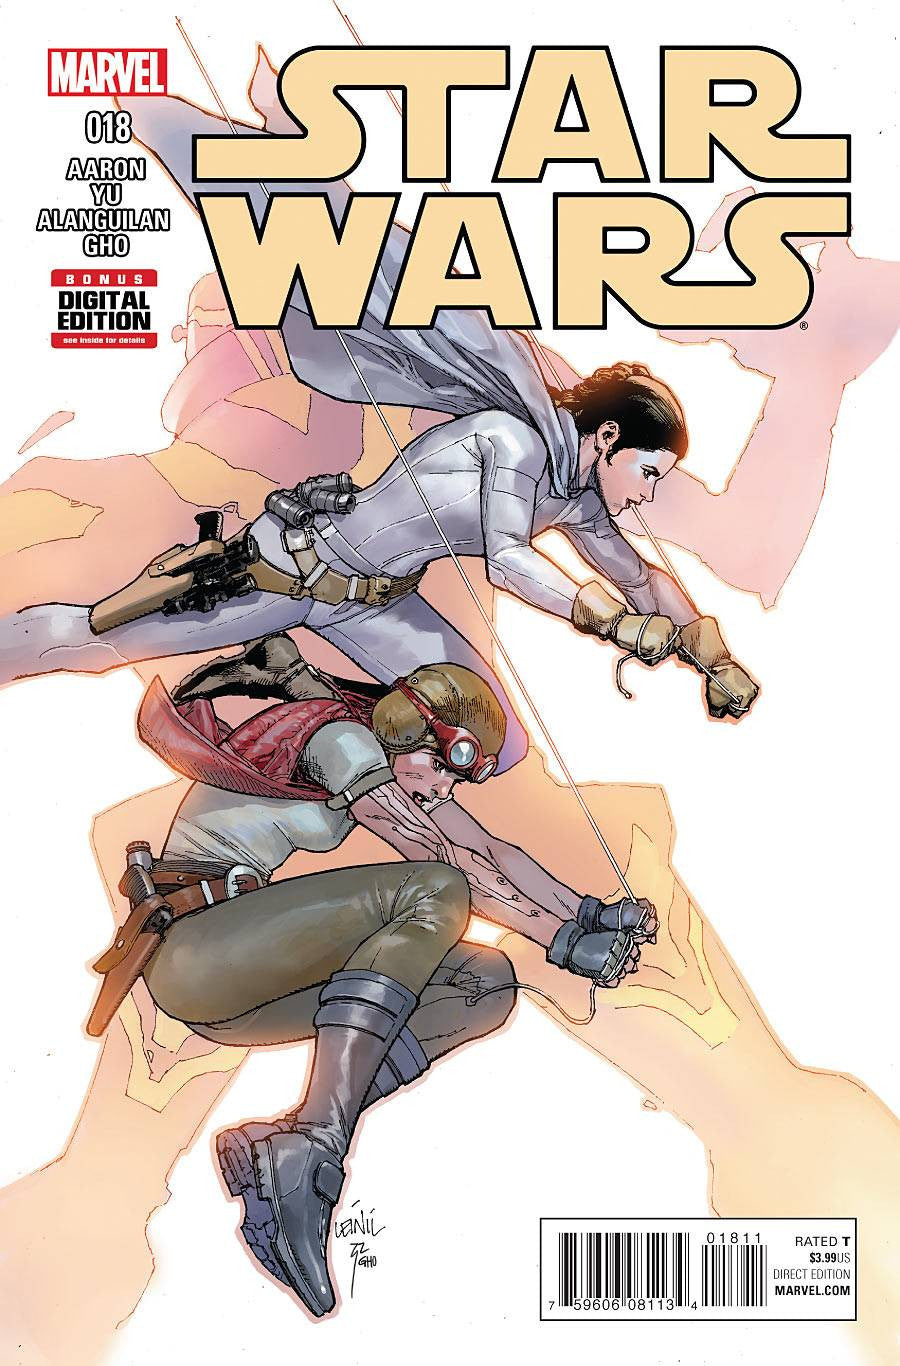 STAR WARS #18 COVER